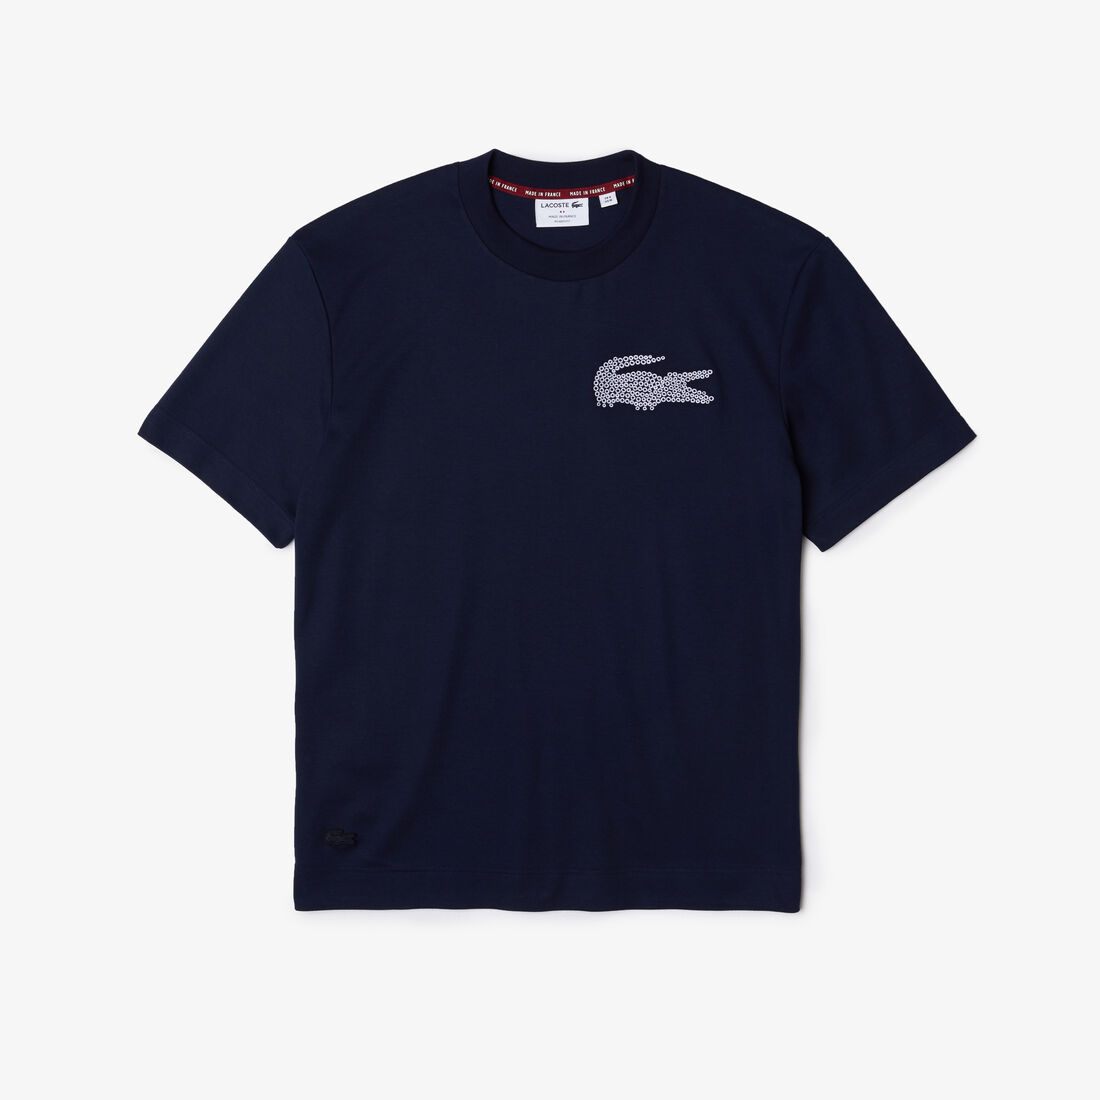 Lacoste Made In France Embroidered Organic Baumwoll T-shirts Herren Blau | HGVA-97814